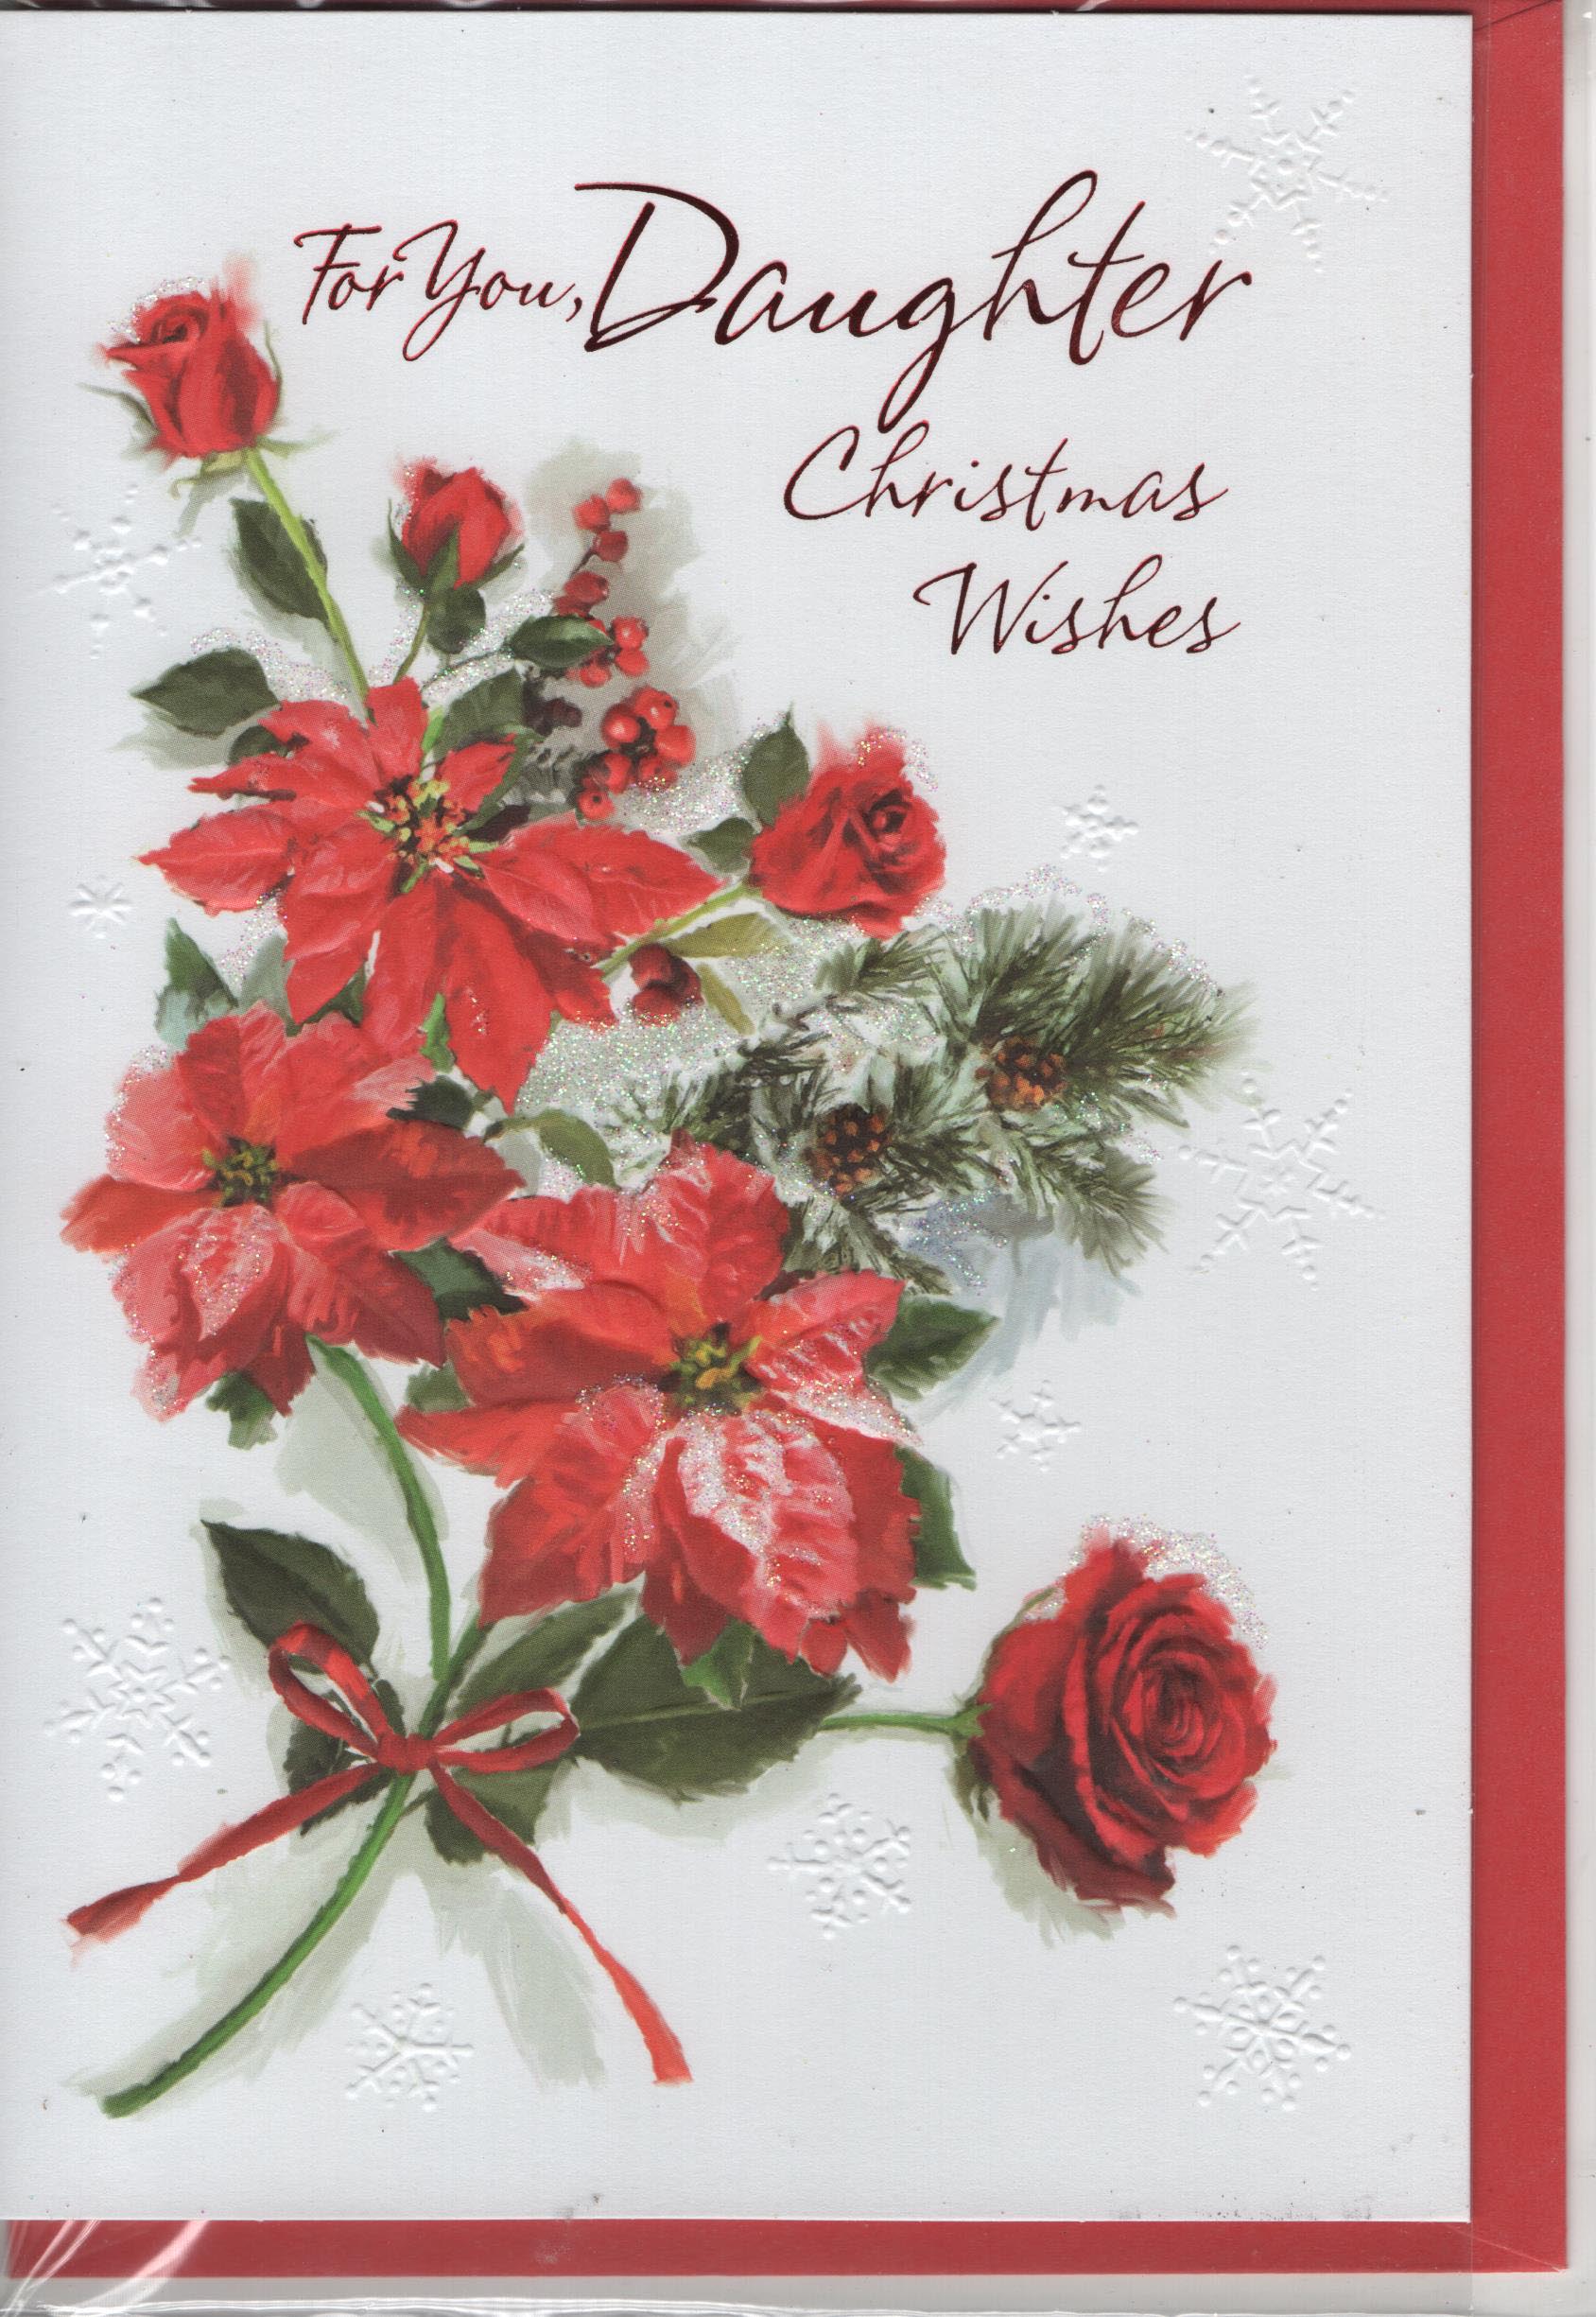 Simon Elvin - For Your Daughter Christmas Wishes